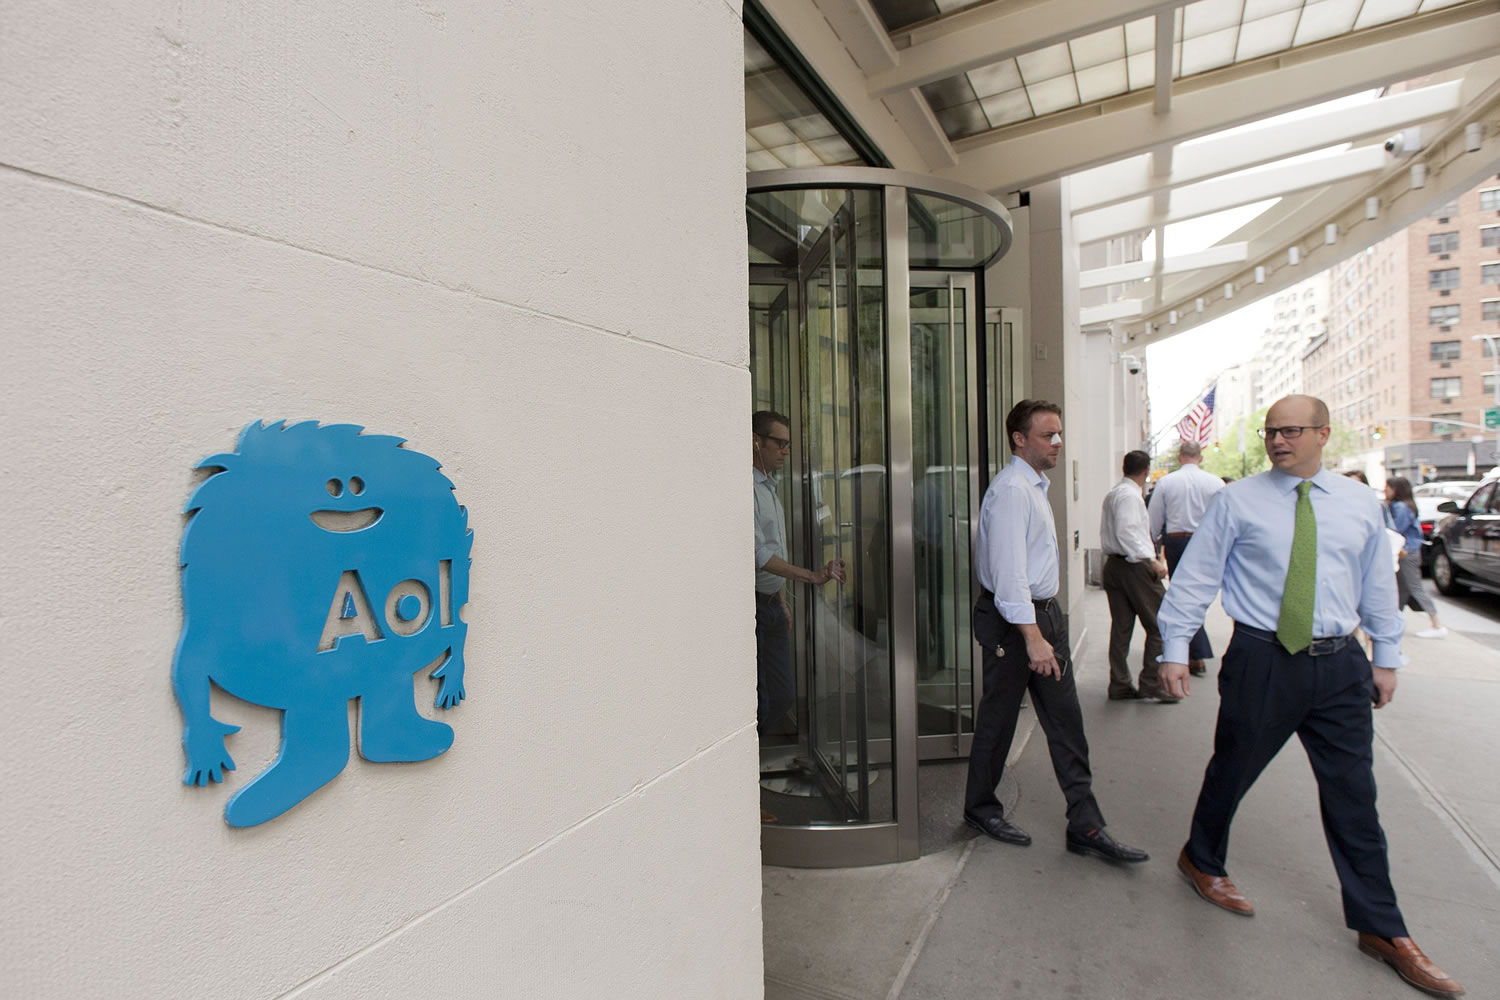 People walk out of the New York office building where AOL headquarters is located, Tuesday, May 12, 2015. Verizon is buying AOL for about $4.4 billion, advancing the telecom's push in both mobile and advertising fields.